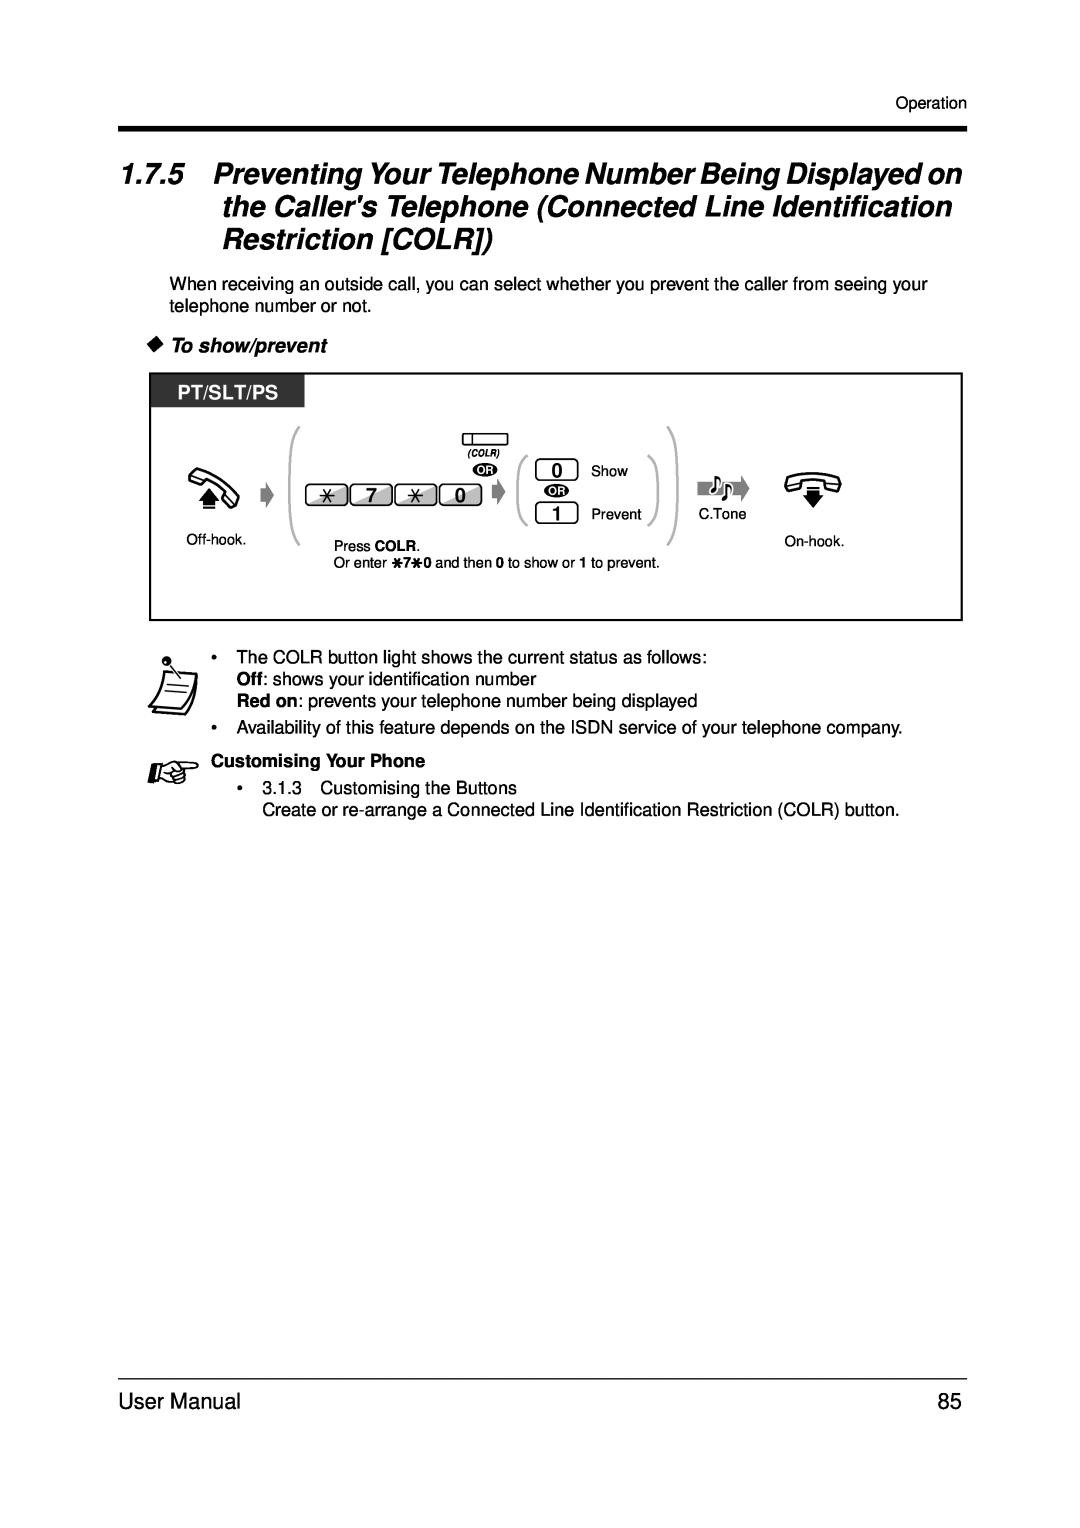 Panasonic KX-TDA200 user manual To show/prevent, Pt/Slt/Ps, Customising Your Phone 